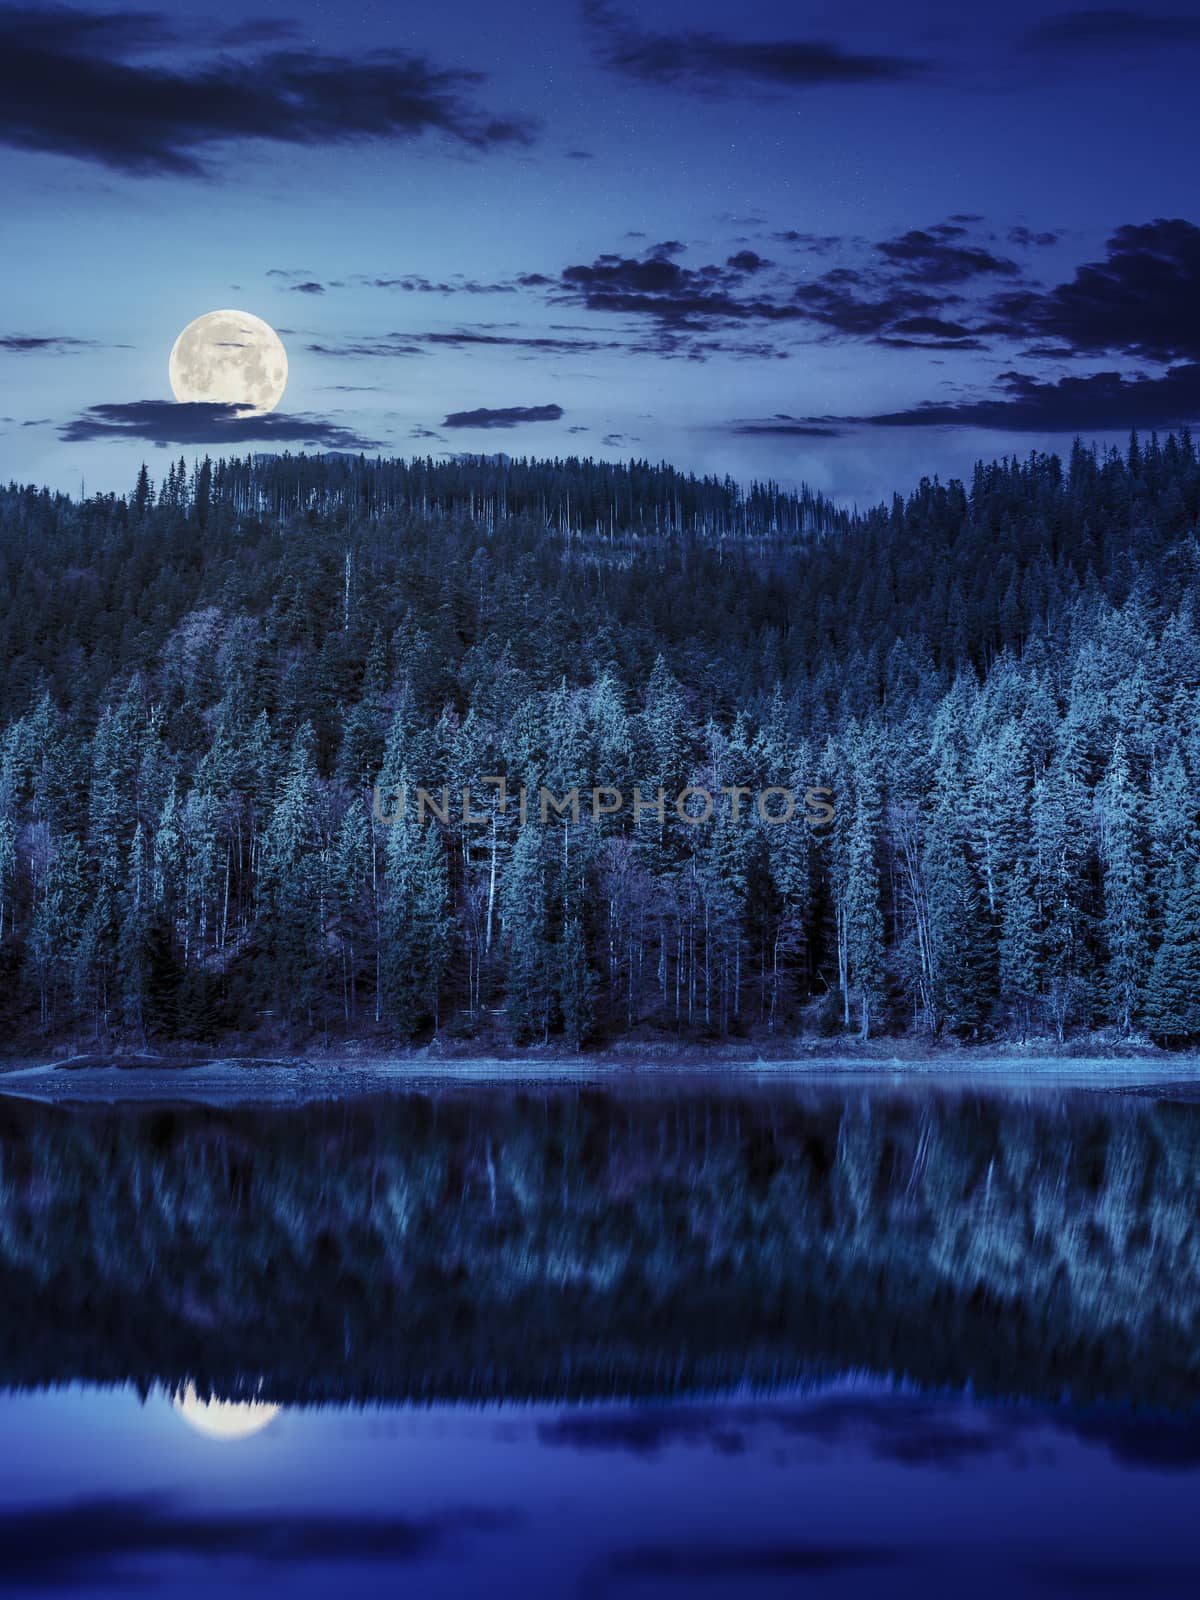 composite autumn  landscape with lake with reflection in pine forest on mountain hill at night in full moon light